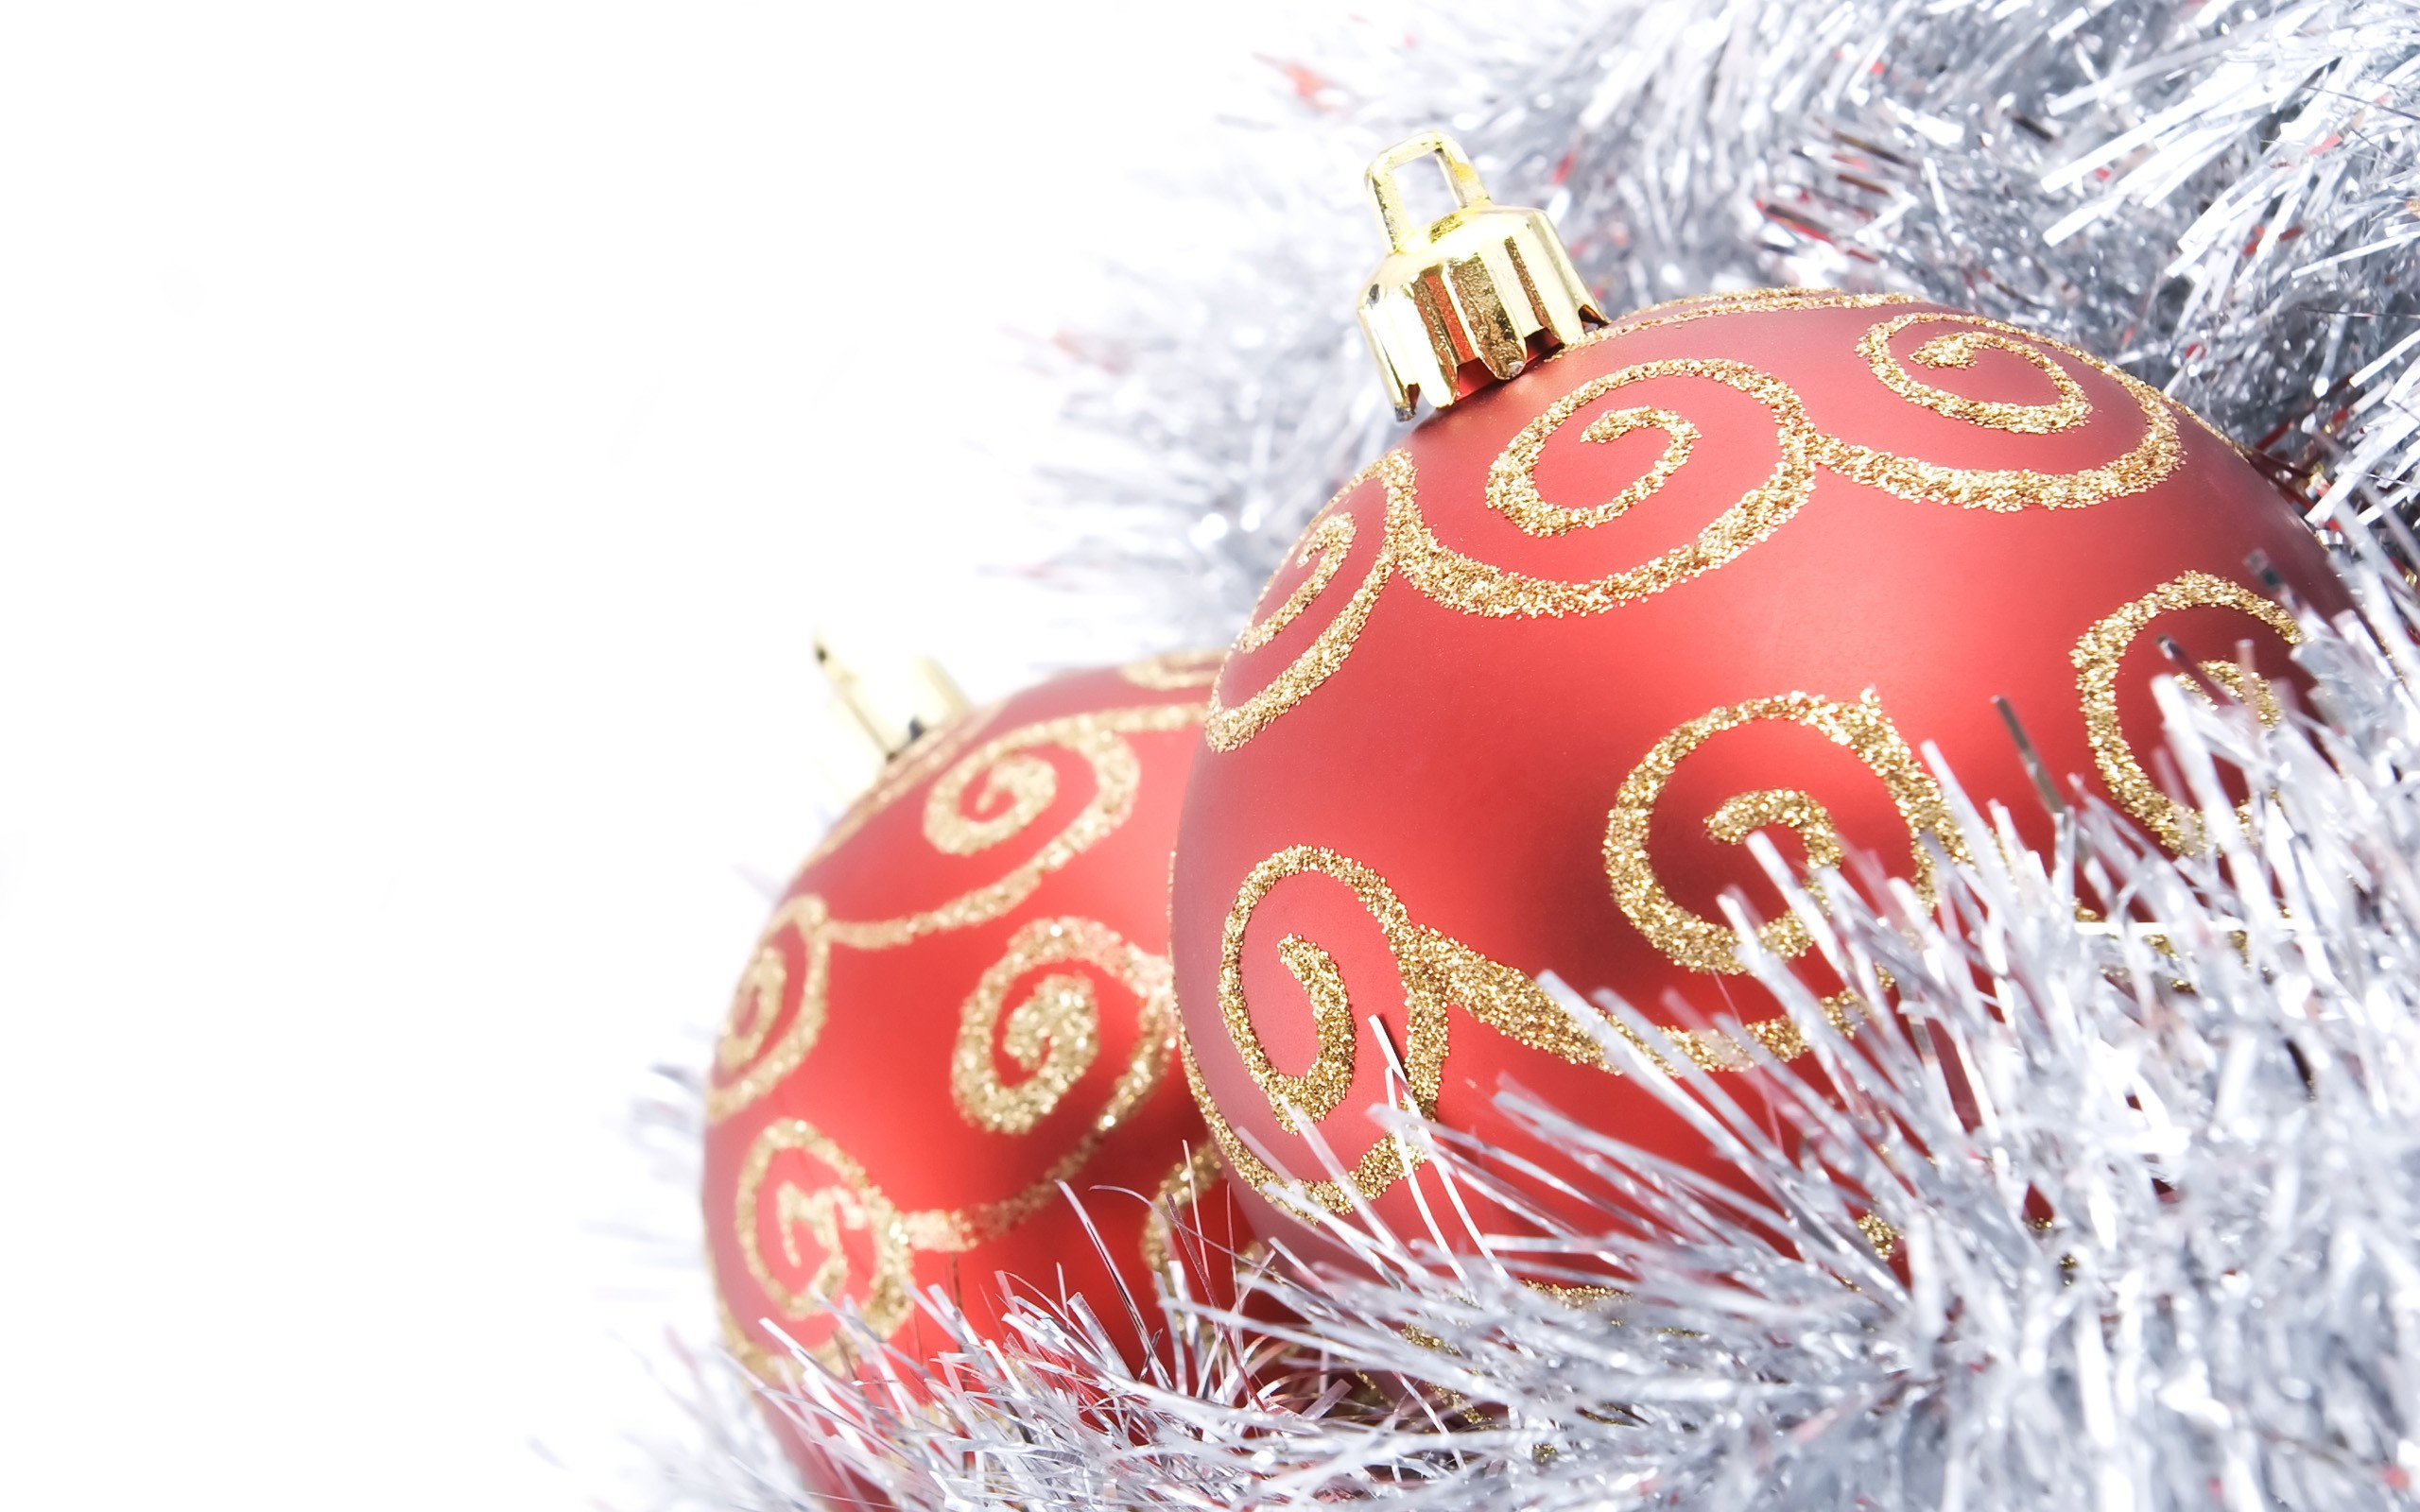 General 2560x1600 New Year Christmas ornaments  decorations holiday Christmas simple background